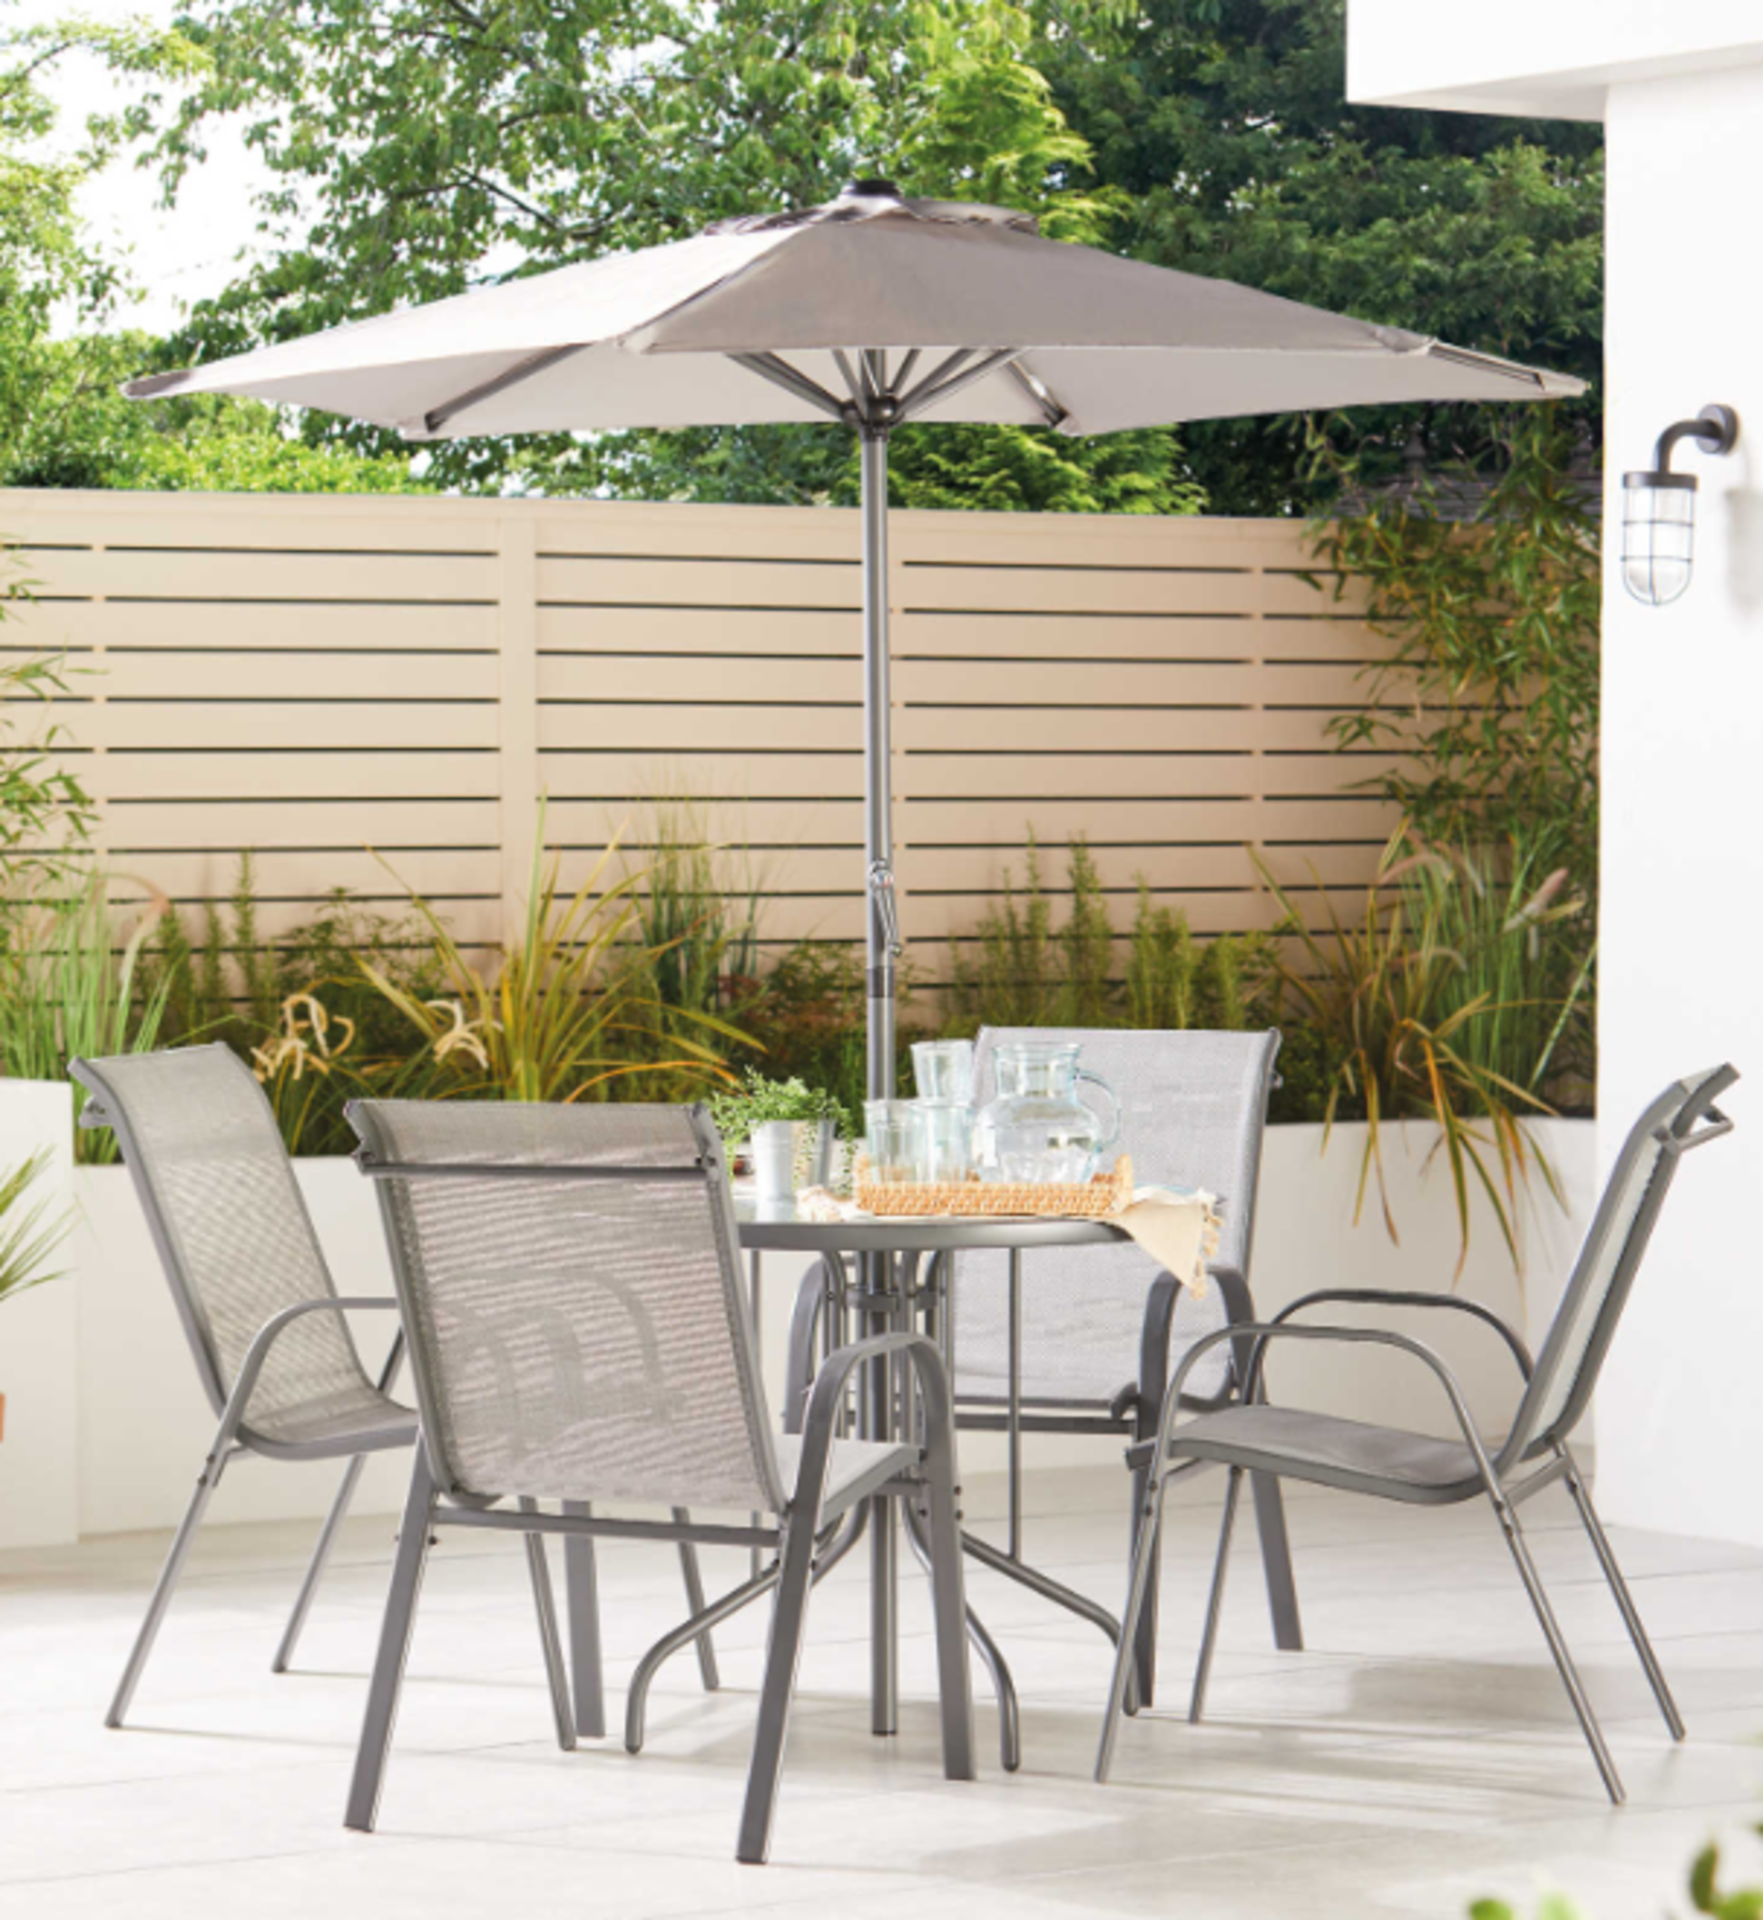 6 Piece Patio Furniture Set. Give your garden a new look with the 6 Piece Patio Furniture Set.